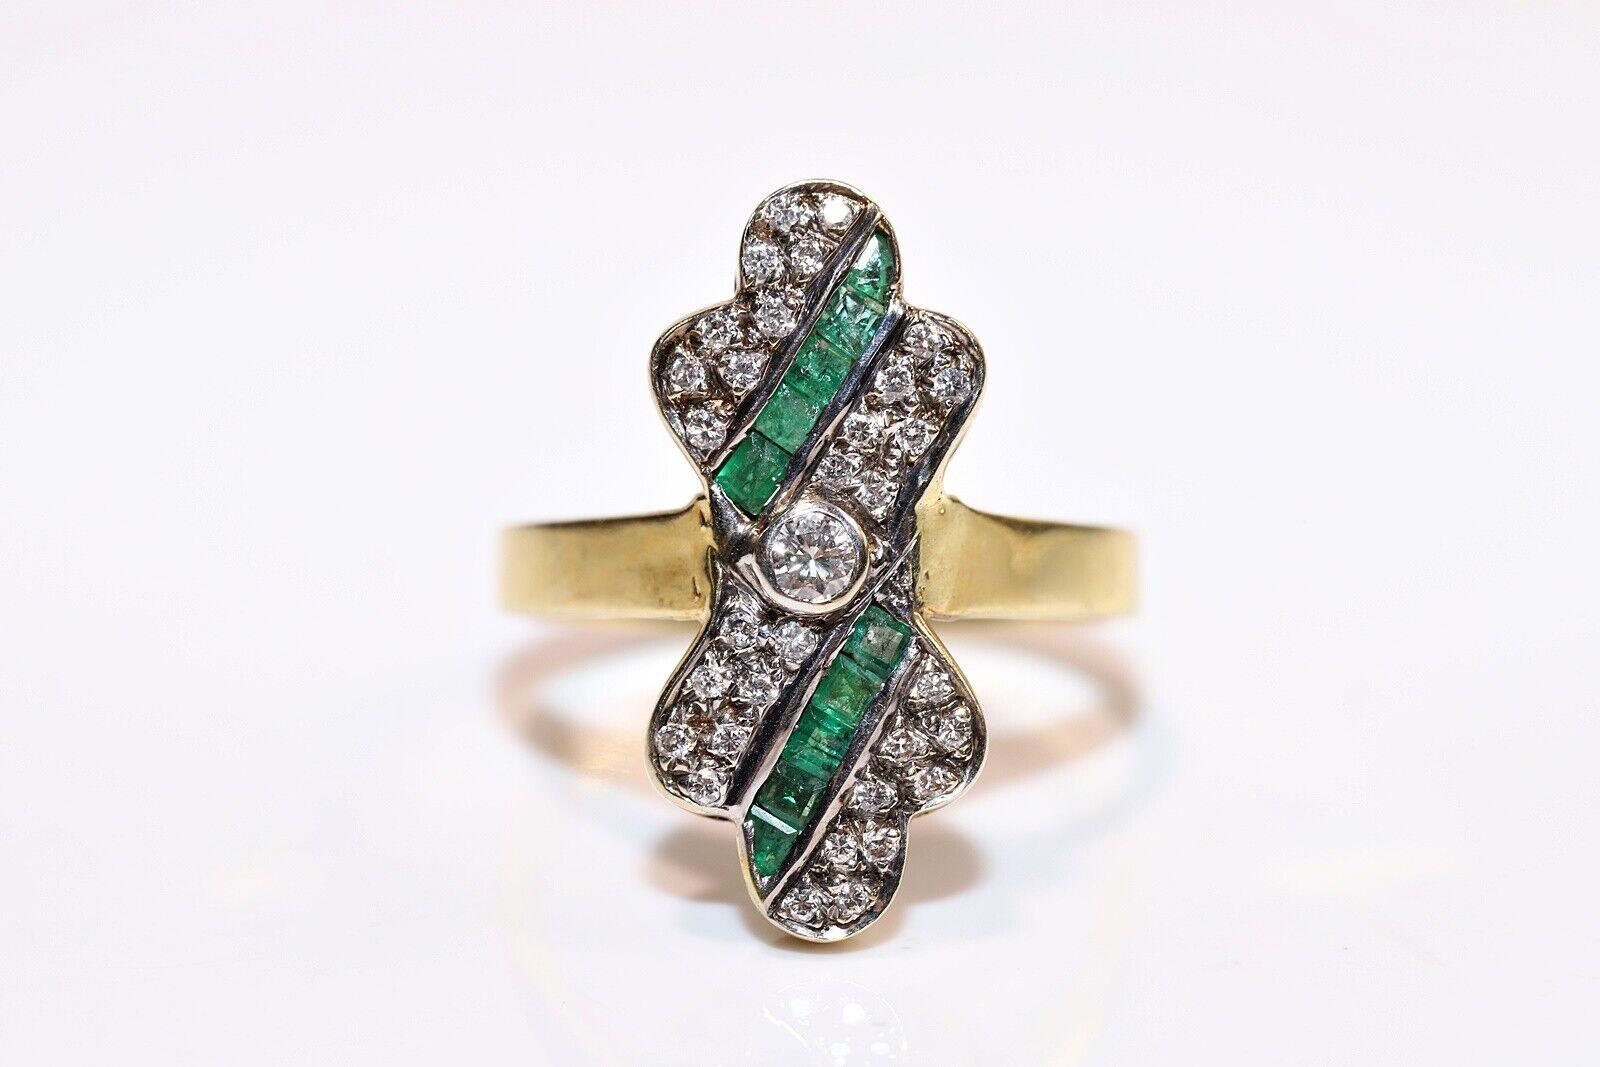 In very good condition.
Total weight is 6.8 grams.
Totally diamond is 0.35 carat.
The diamond is has  G-H color and vs-s1 clarity.
Totally is emerald  0.45 carat.
Ring size is US 7.5 (We offer free resizing)
Box is not included.
We can make any